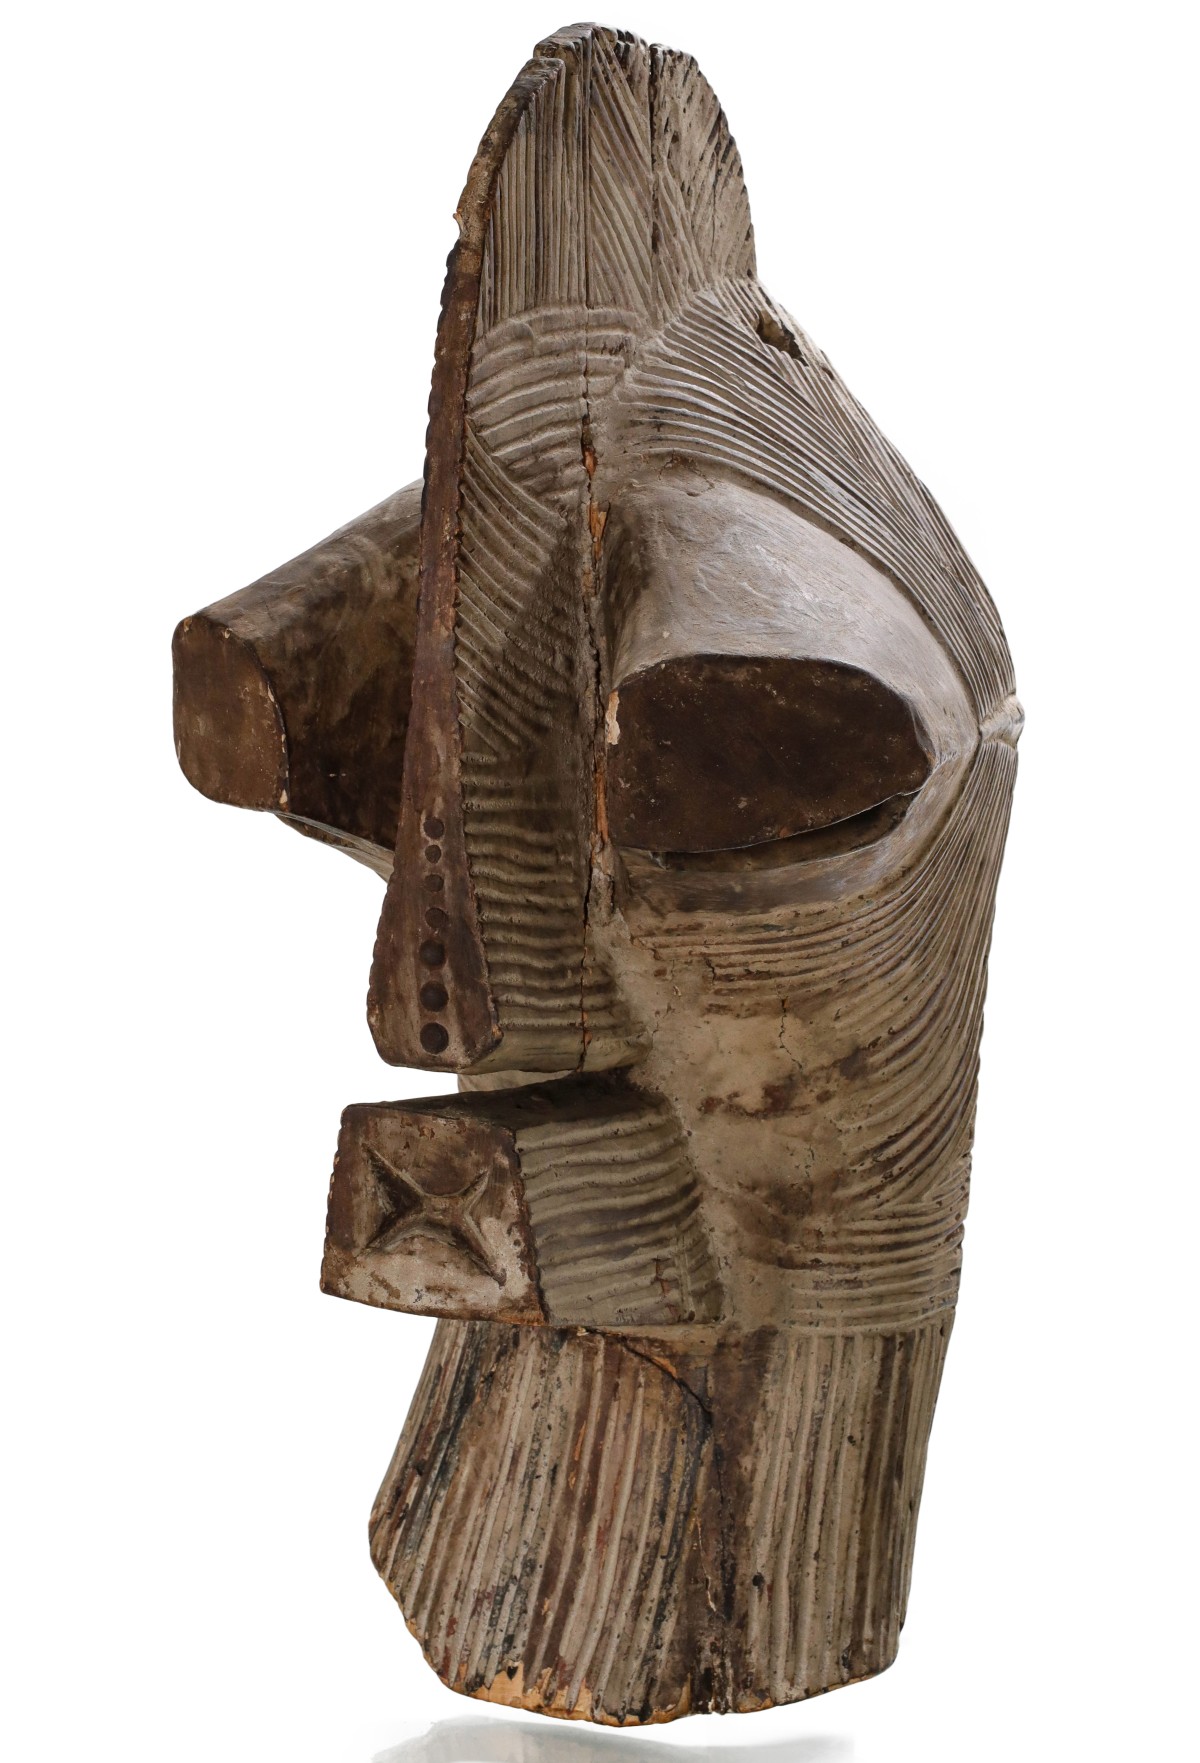 A CARVED STRIATED AFRICAN MASK ATTR SONGYE PEOPLES